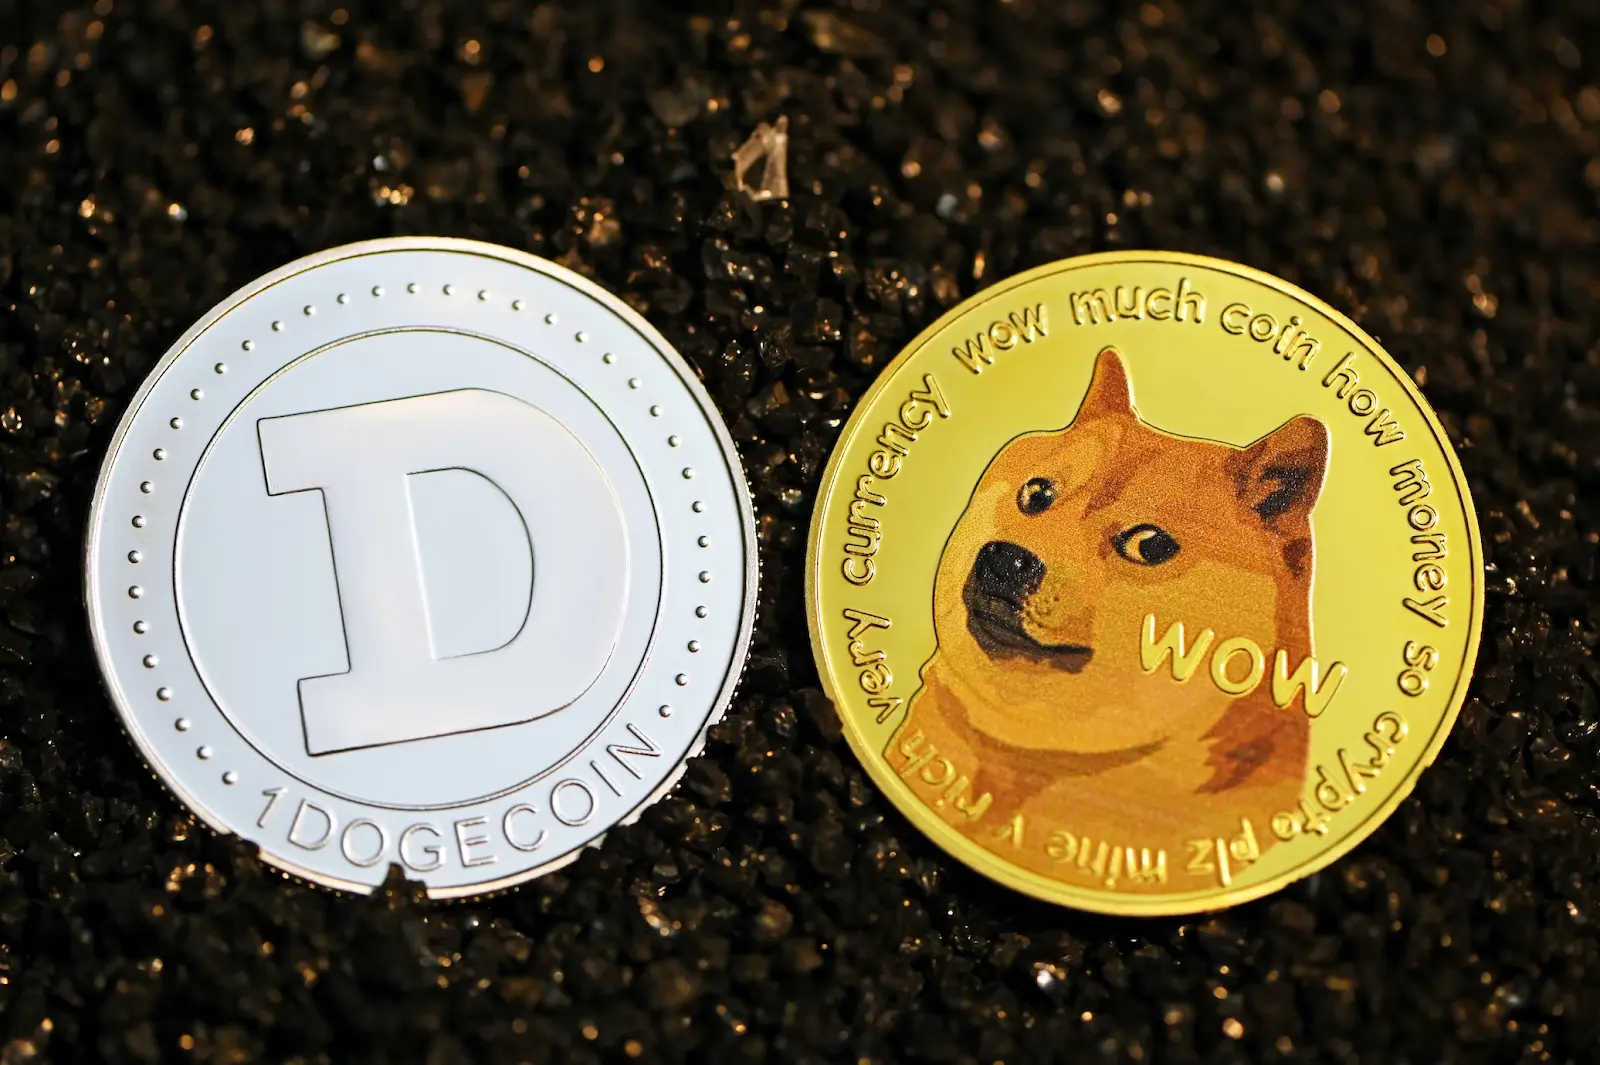 Two Dogecoins; one with symbol D and another with Shiba Inu meme image